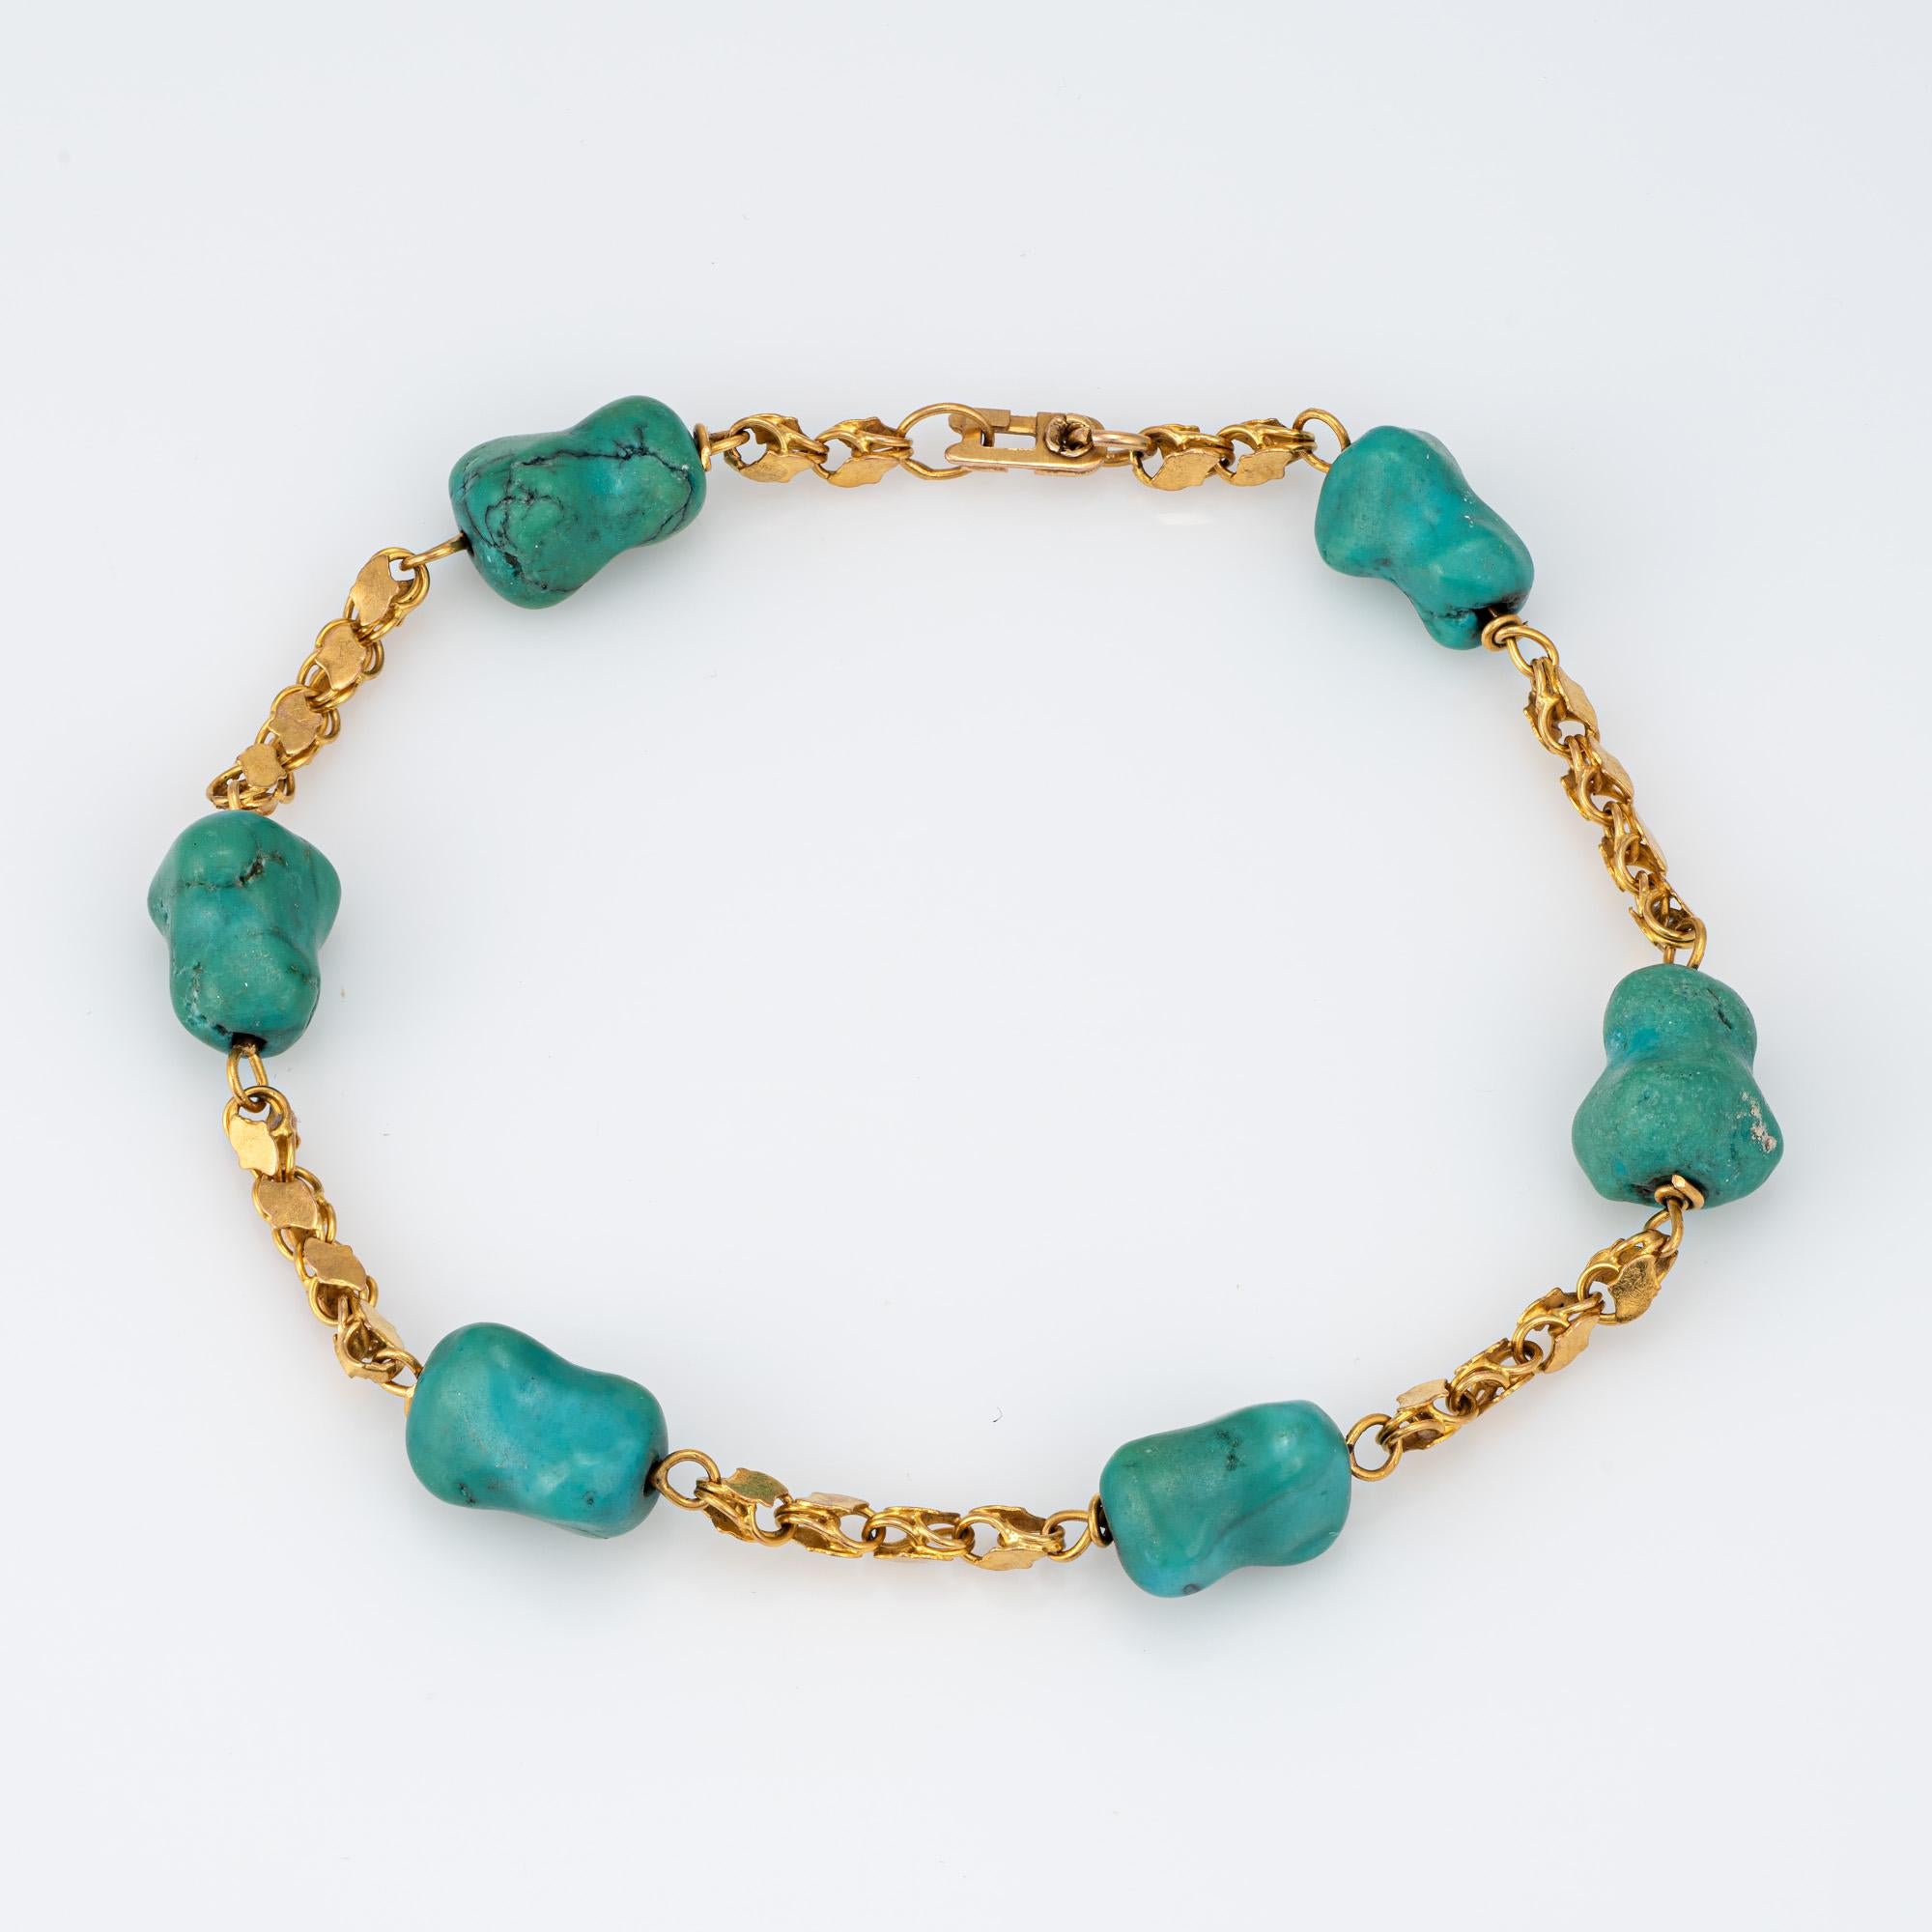 Stylish and finely detailed vintage turquoise bracelet crafted in 18 karat yellow gold (circa 1960s). 

Turquoise measures (average) 10mm x 8mm. The turquoise is in very good condition and free of cracks or chips. 

Freeform turquoise matrix stones